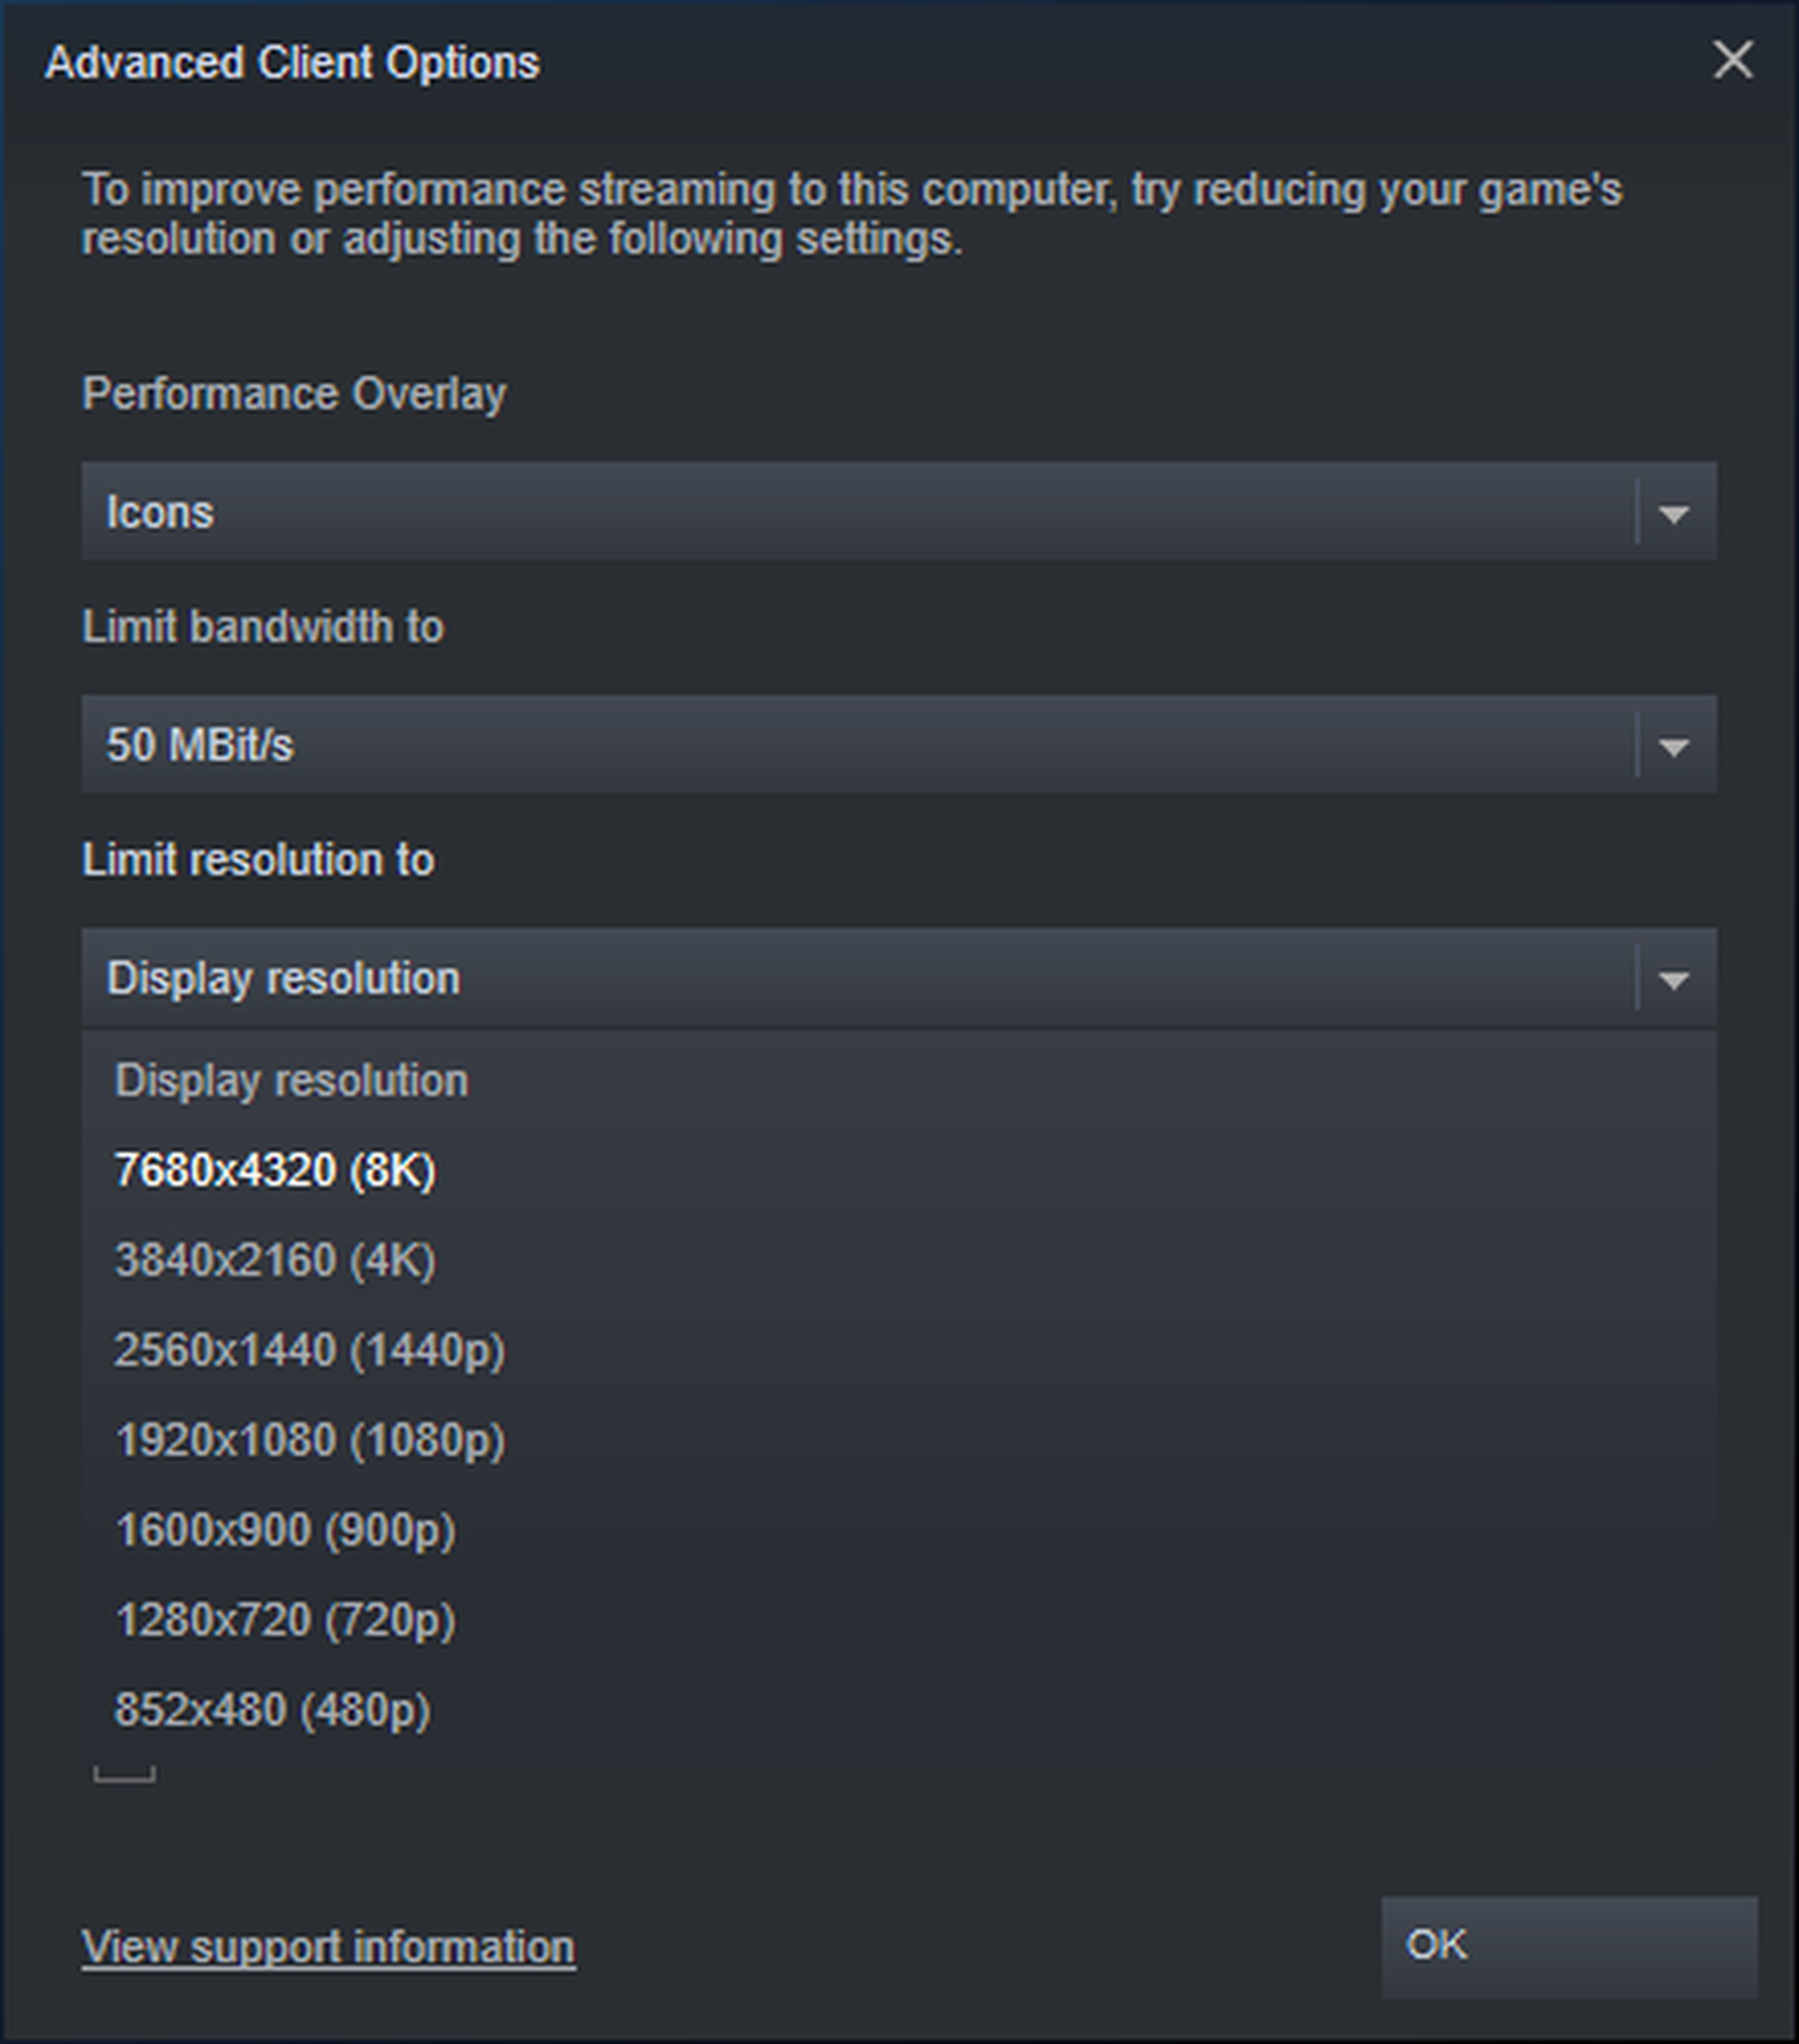 8K Remote Play is now available in the stable Steam client, after coming to the beta a few days ago.